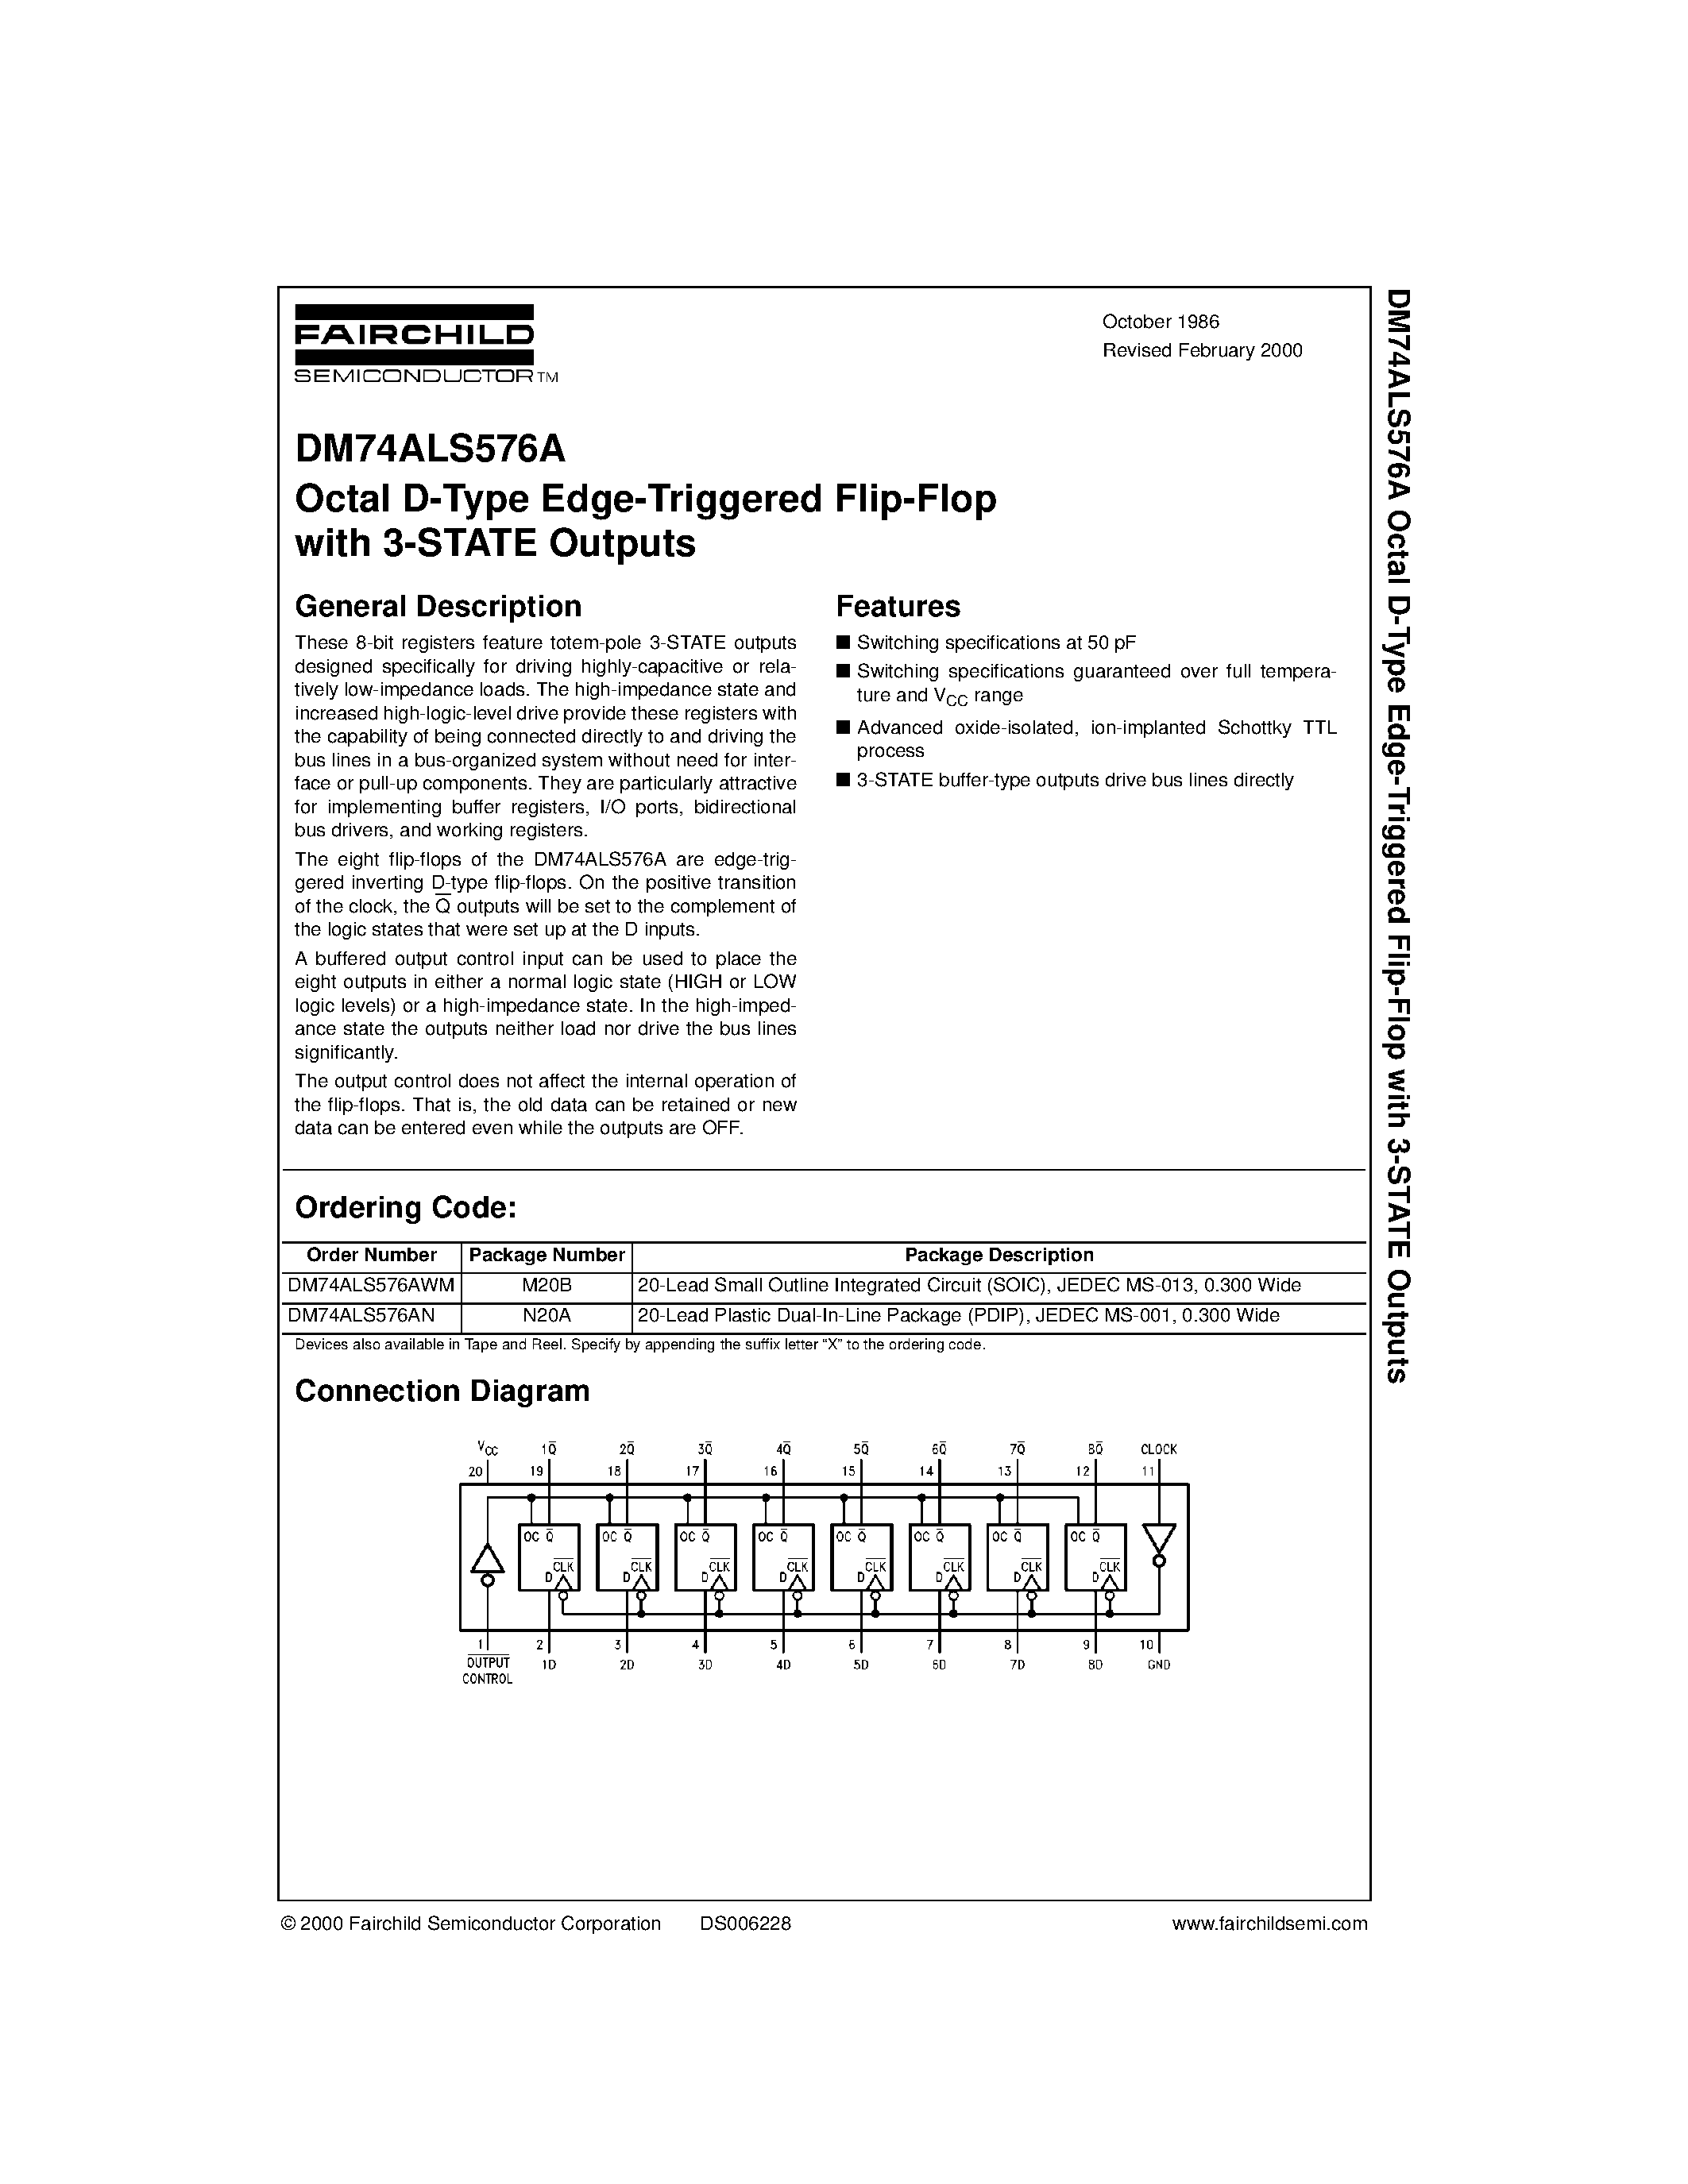 Datasheet DM74ALS576AWM - Octal D-Type Edge-Triggered Flip-Flop with 3-STATE Outputs page 1